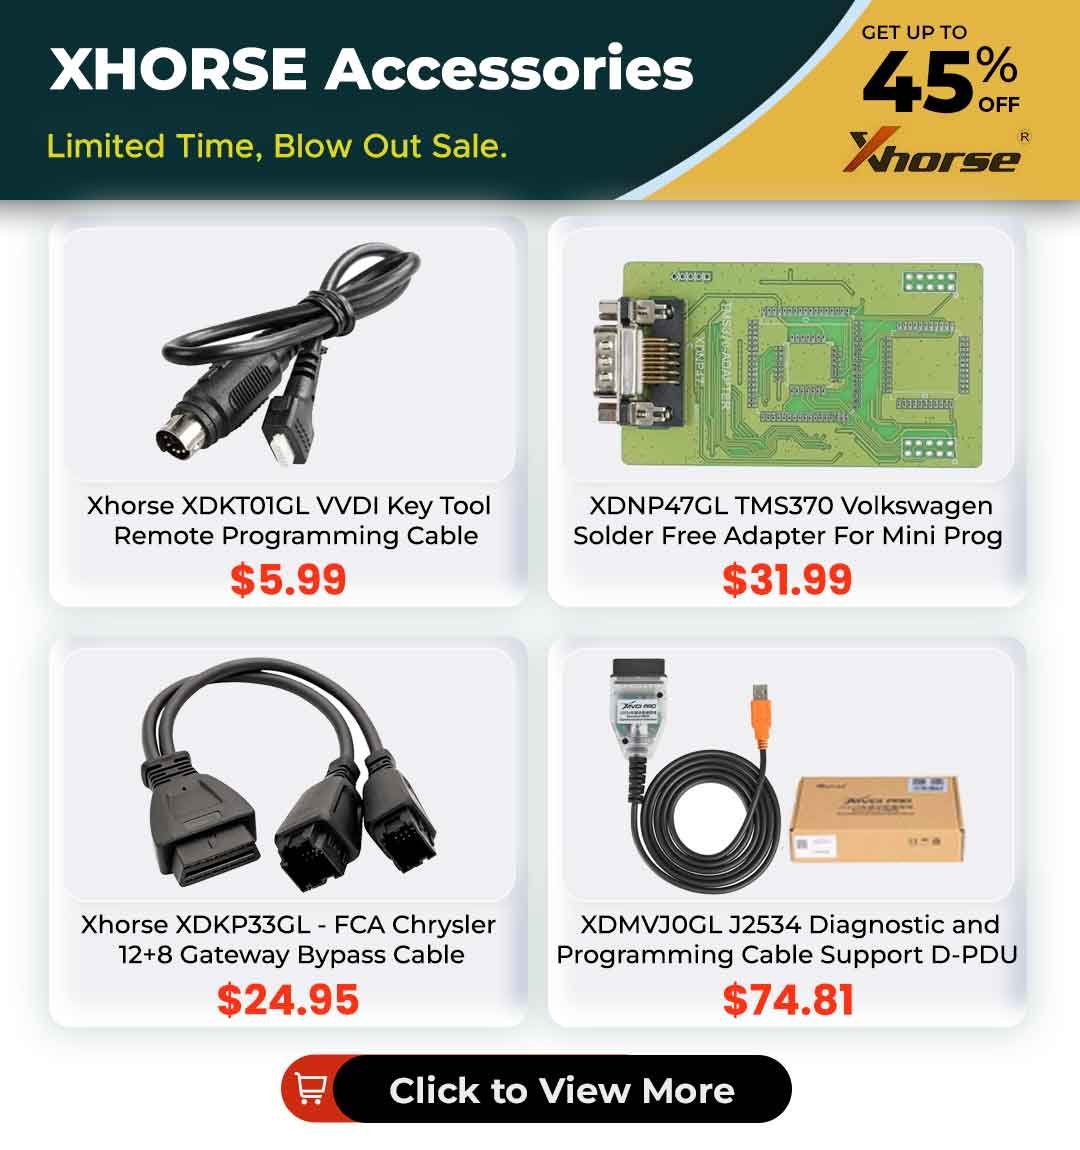 XHORSE Accessories